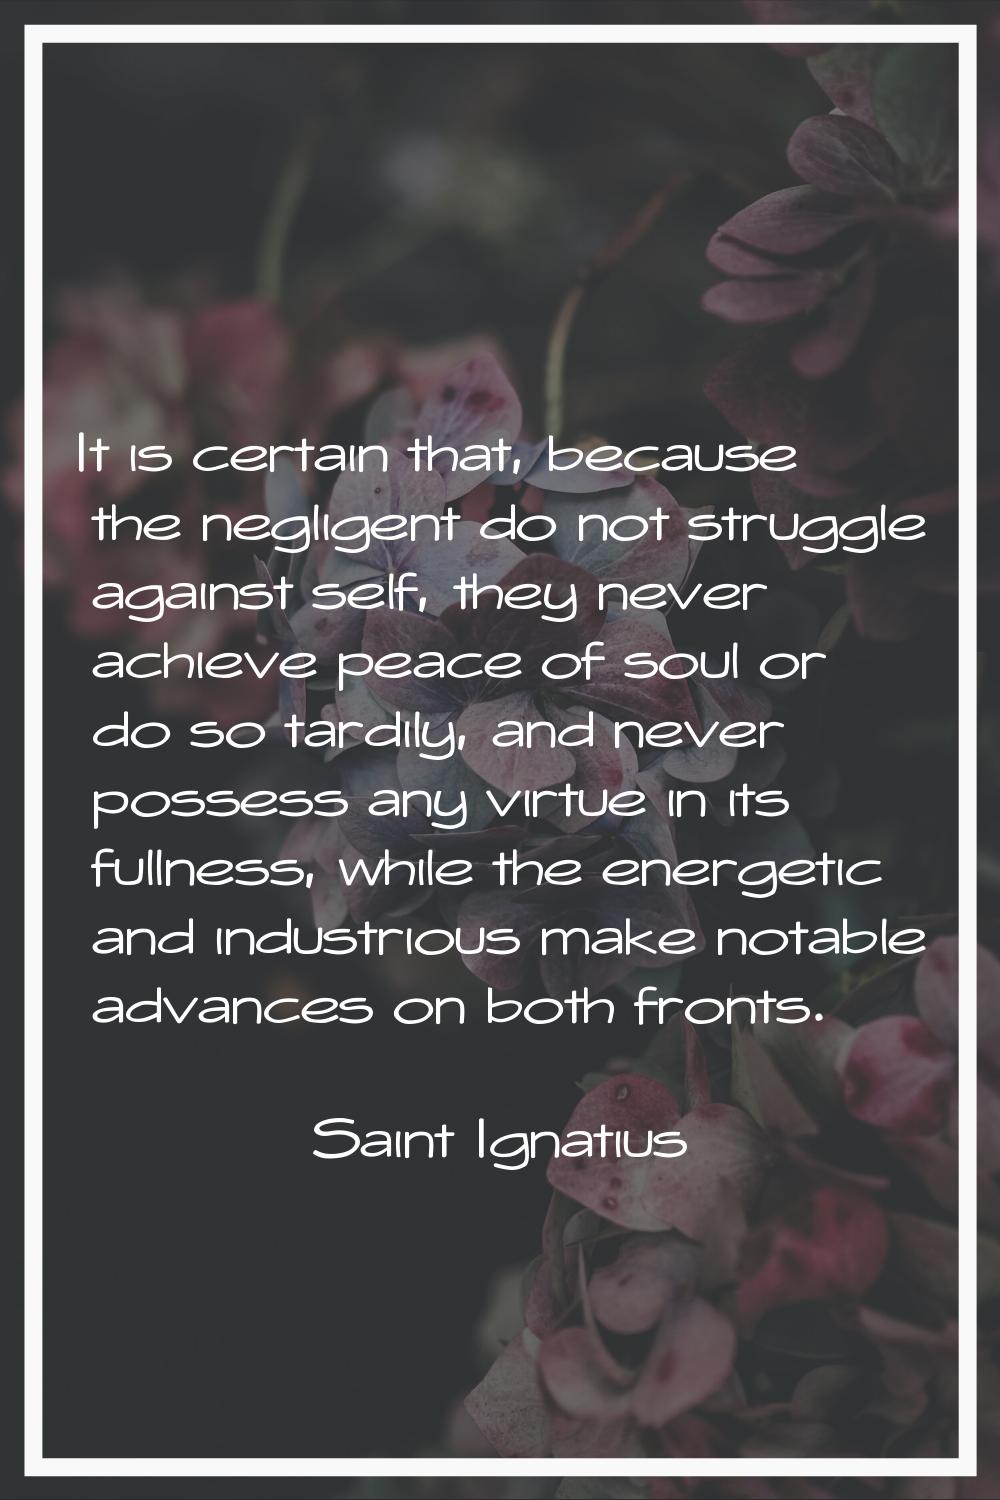 It is certain that, because the negligent do not struggle against self, they never achieve peace of